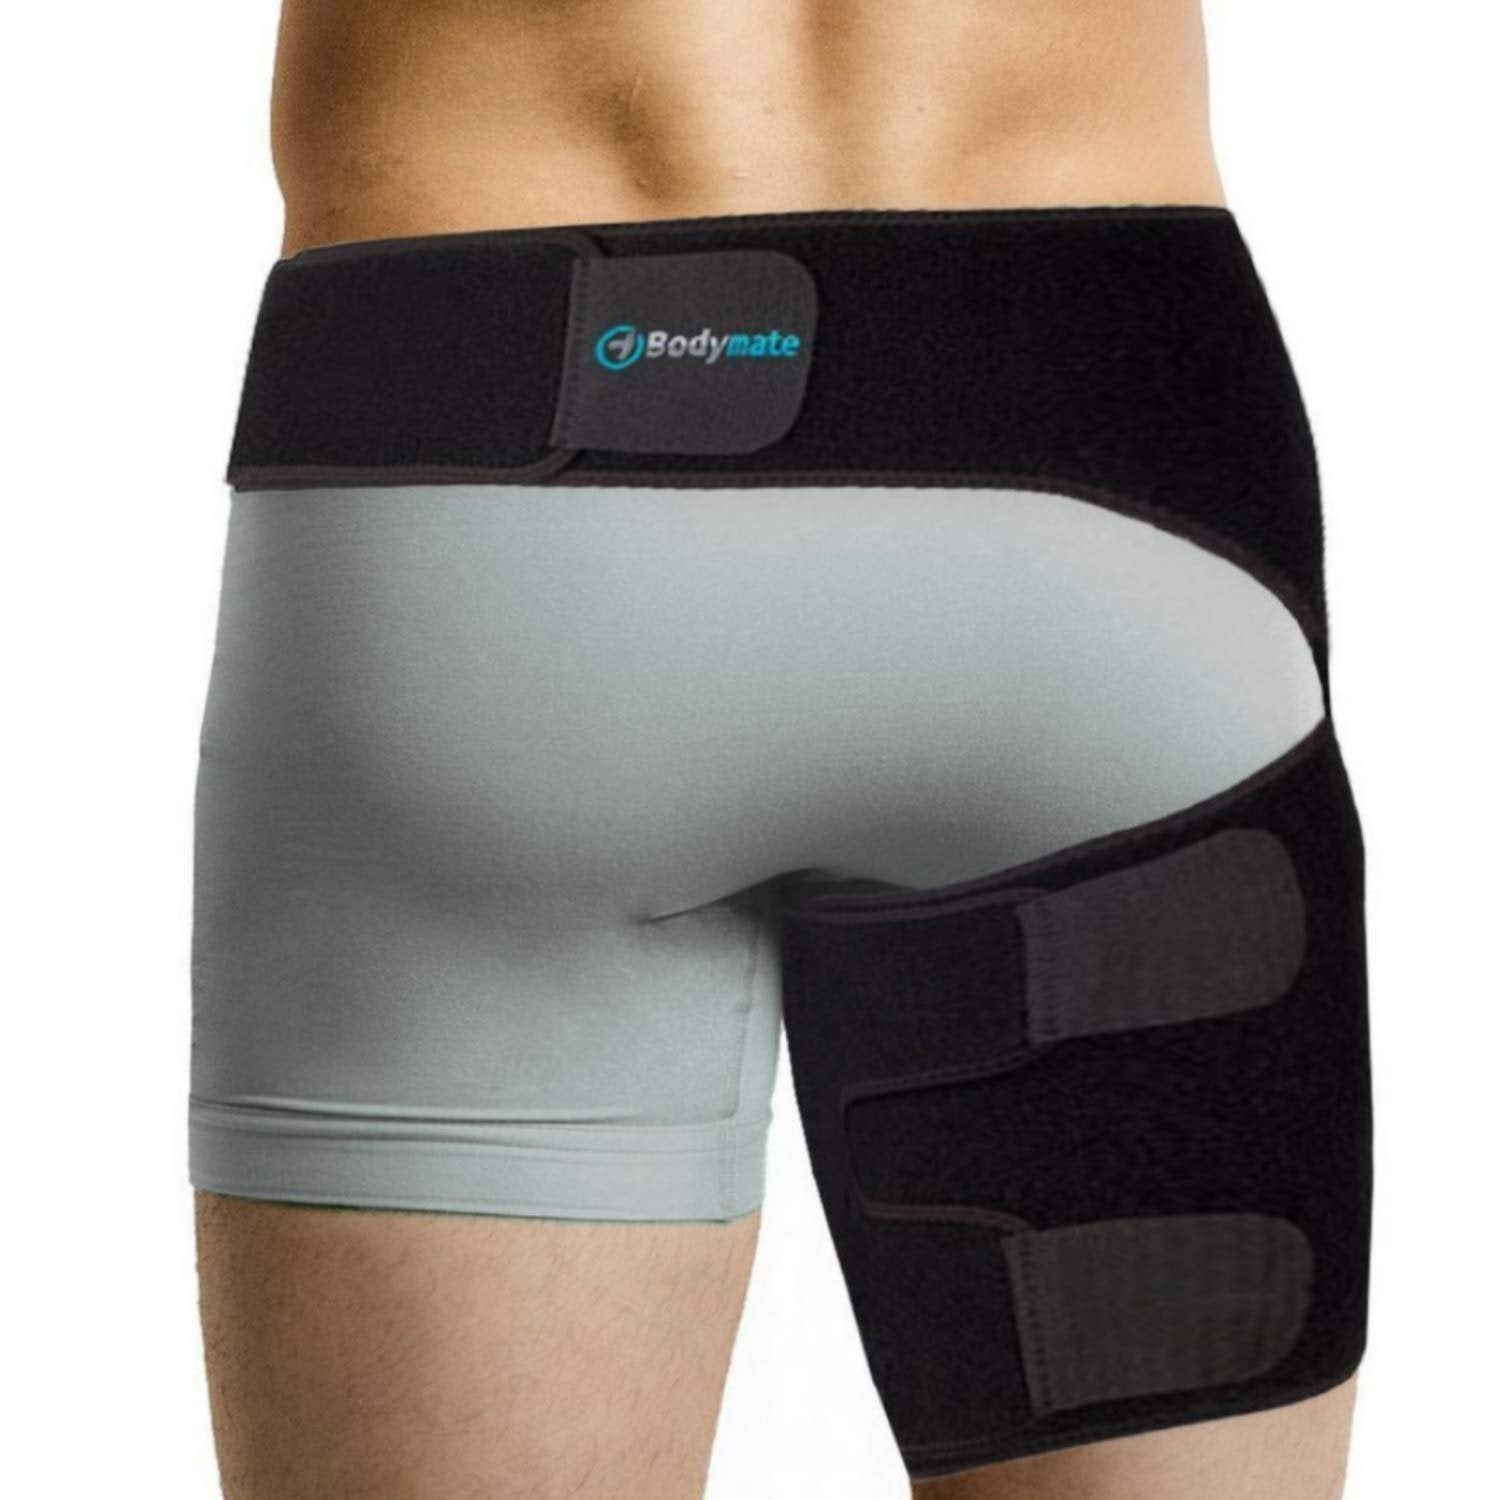 BODYMATE Hip Brace for Sciatica Pain Relief | SI Belt/Sacroiliac Belt | Black | Medium (Hip 32- 44") | Compression Wrap for Thigh, Hamstring, Joints, Arthritis, Pulled Muscles"